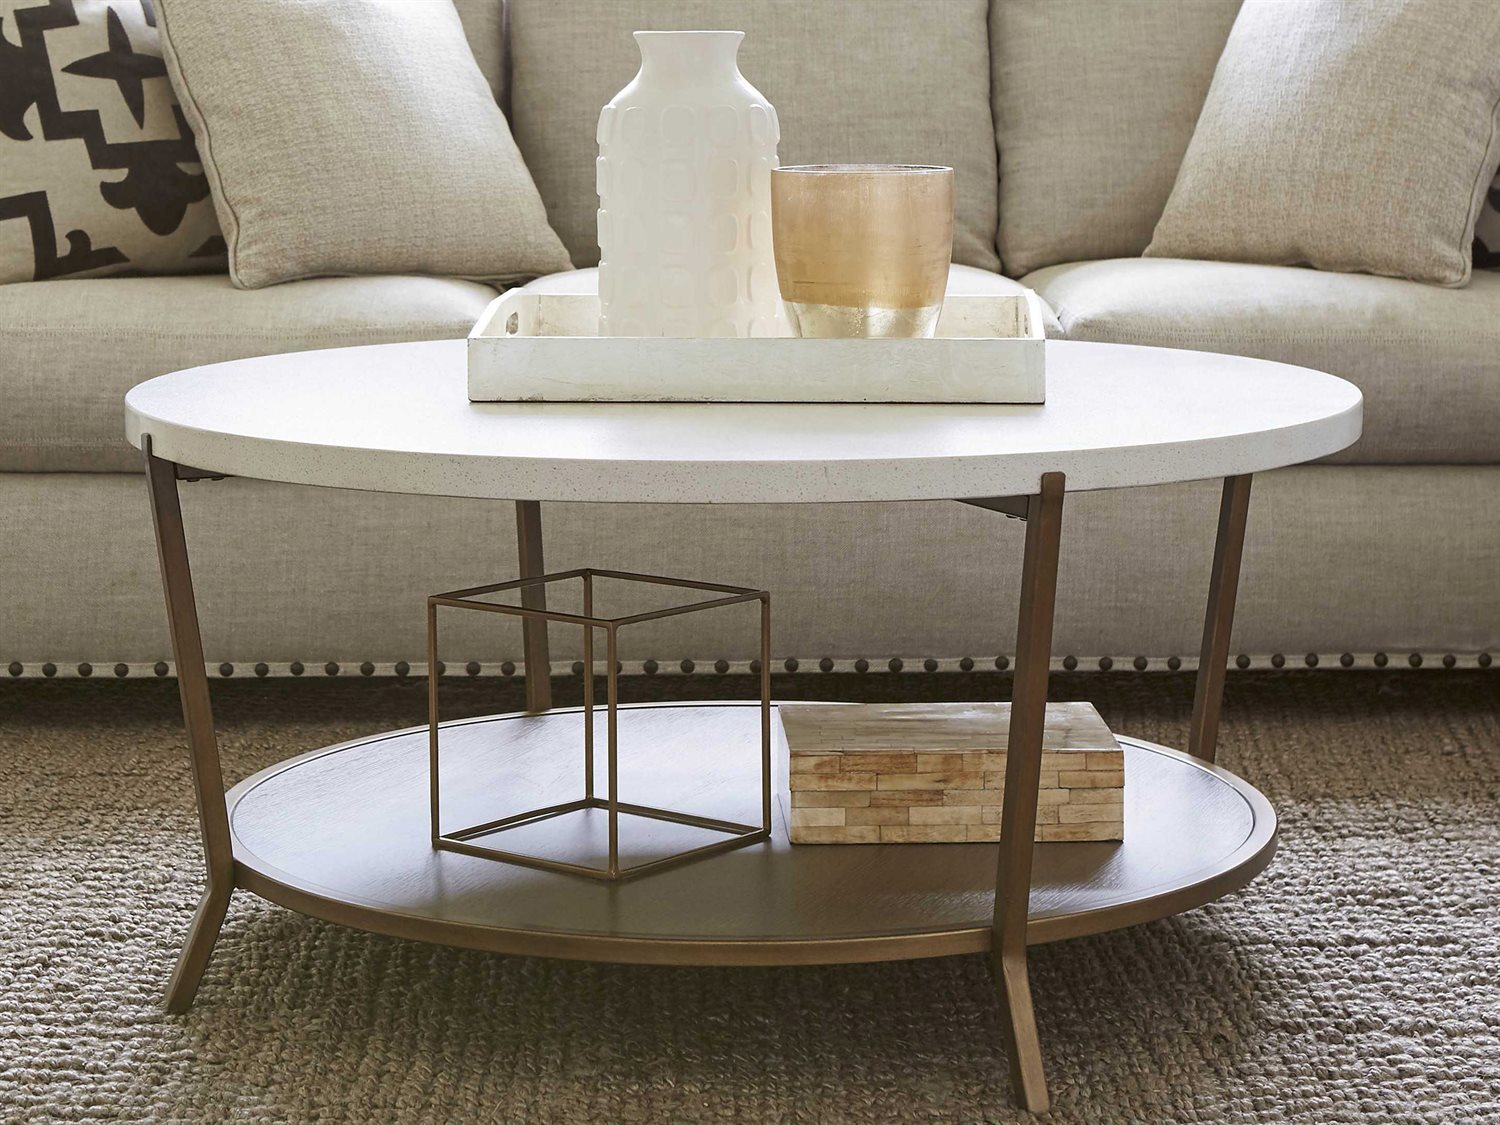 Signature Design Brookfield Round Cocktail Table W Shelf Fisher Home Furnishings Cocktail Coffee Tables